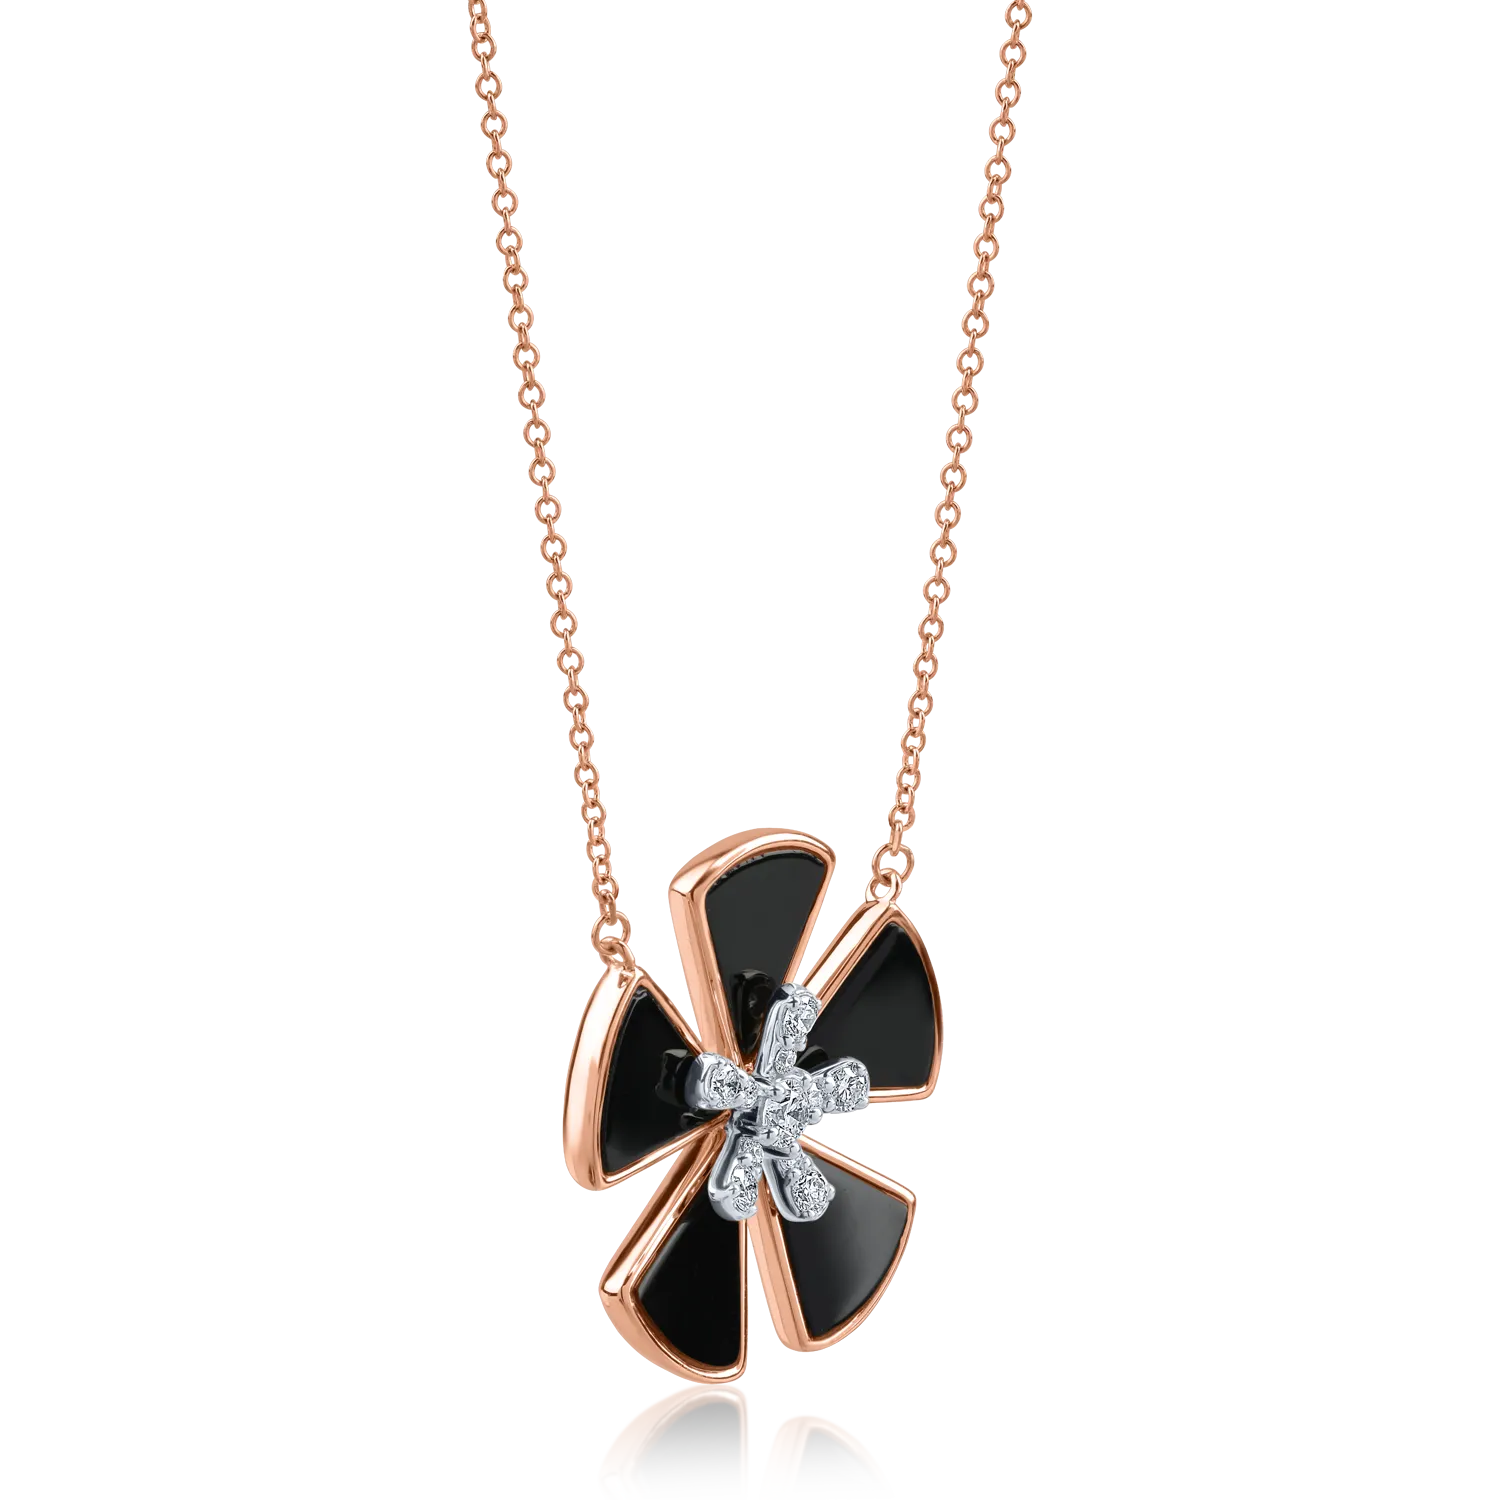 Rose gold flower pendant necklace with 2.64ct black onyx and 0.25ct diamonds